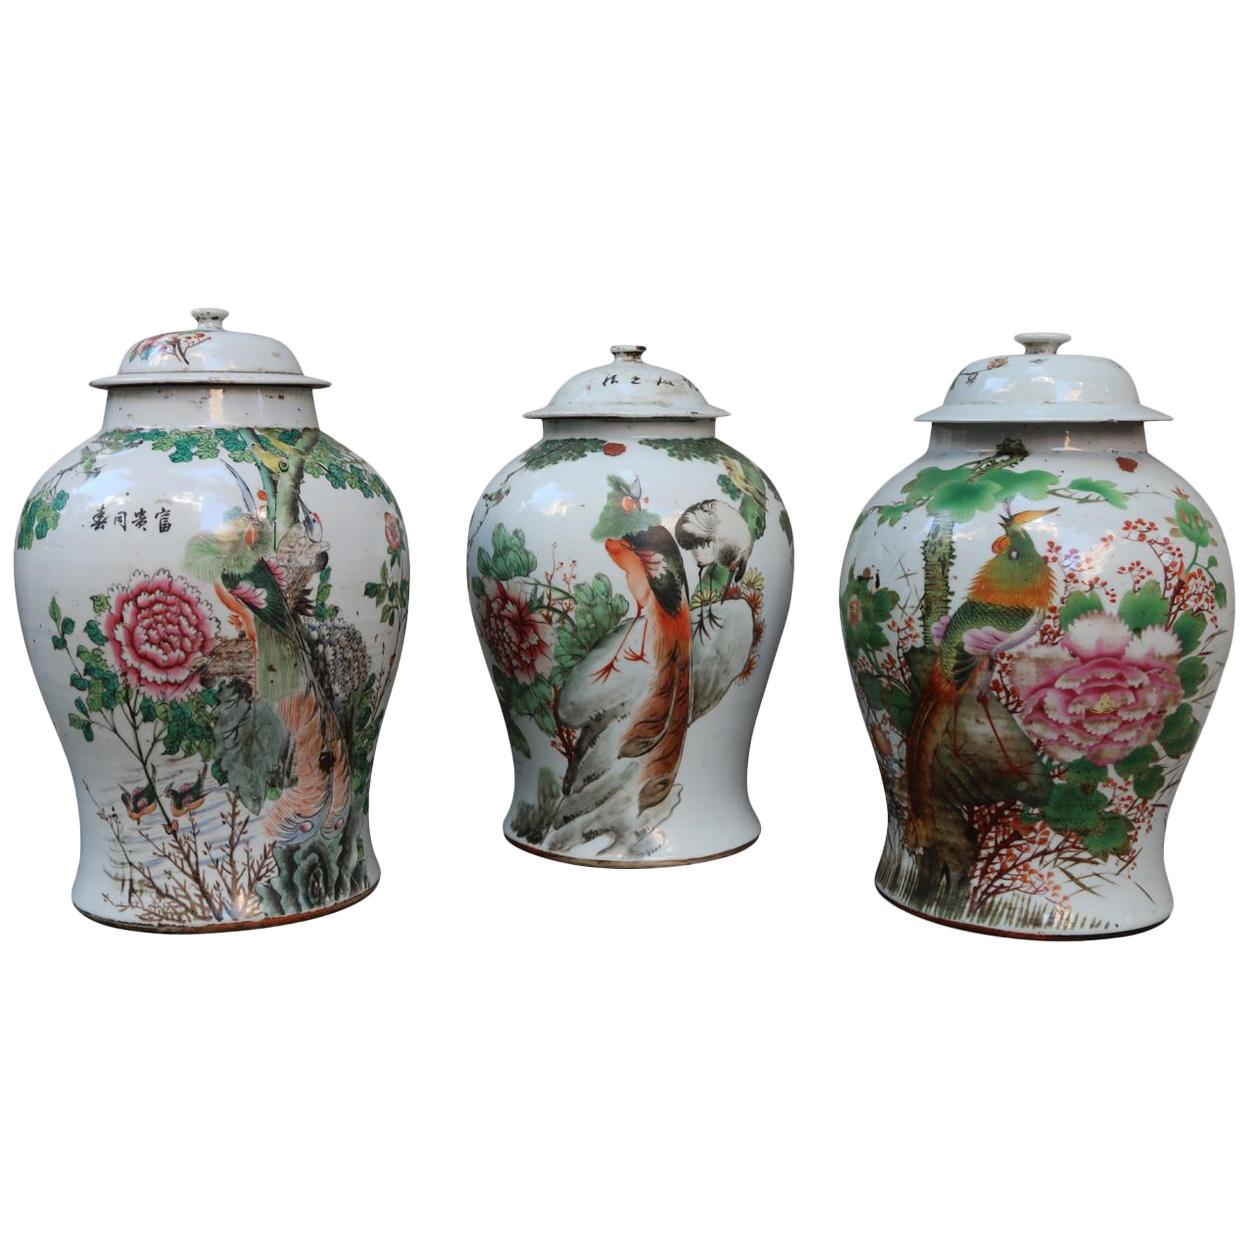 3 Porcelain Chinese Vases, Early 20th Century For Sale